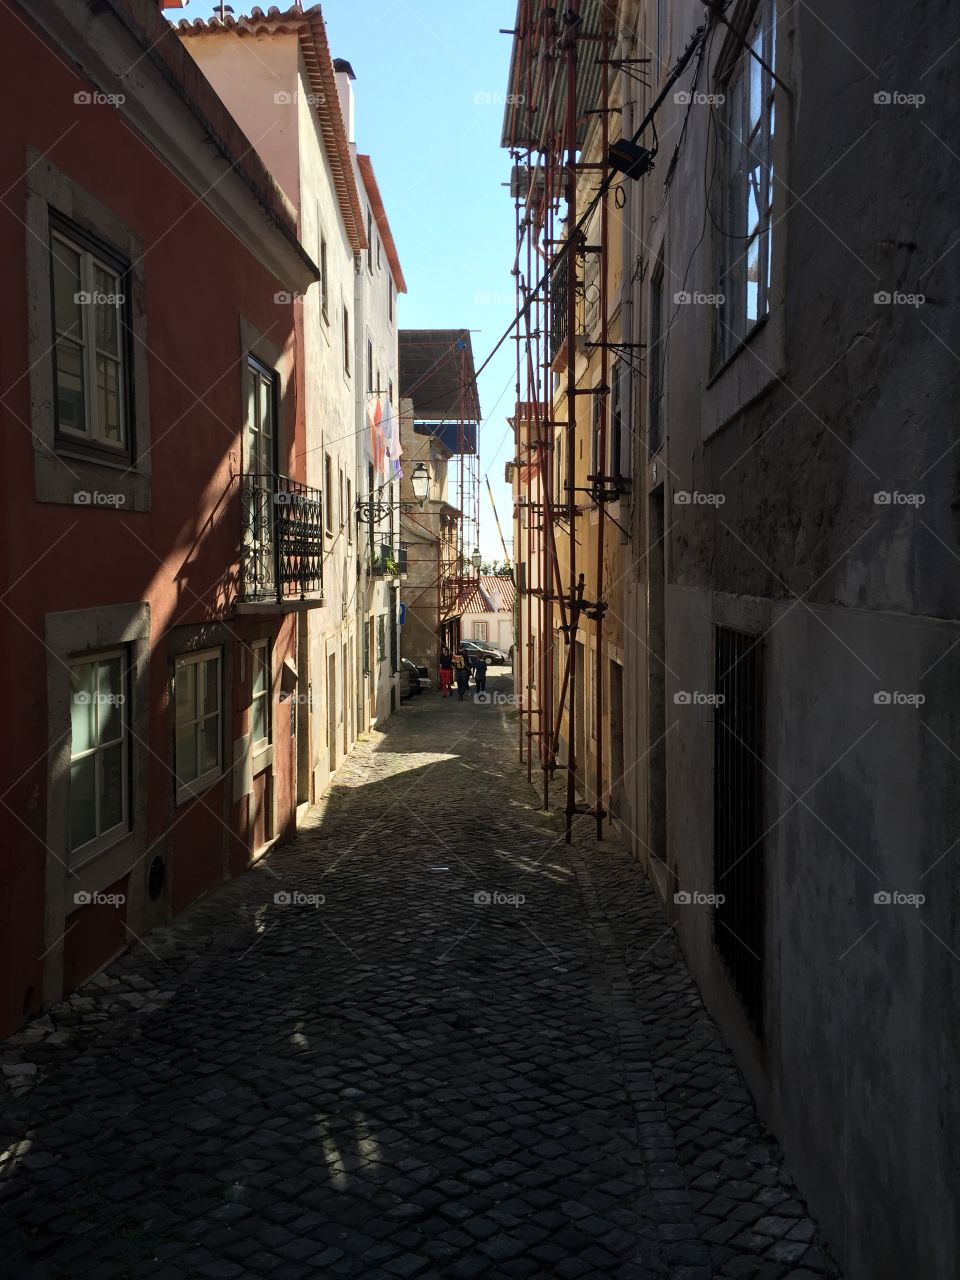 Narrow streets of Portugal